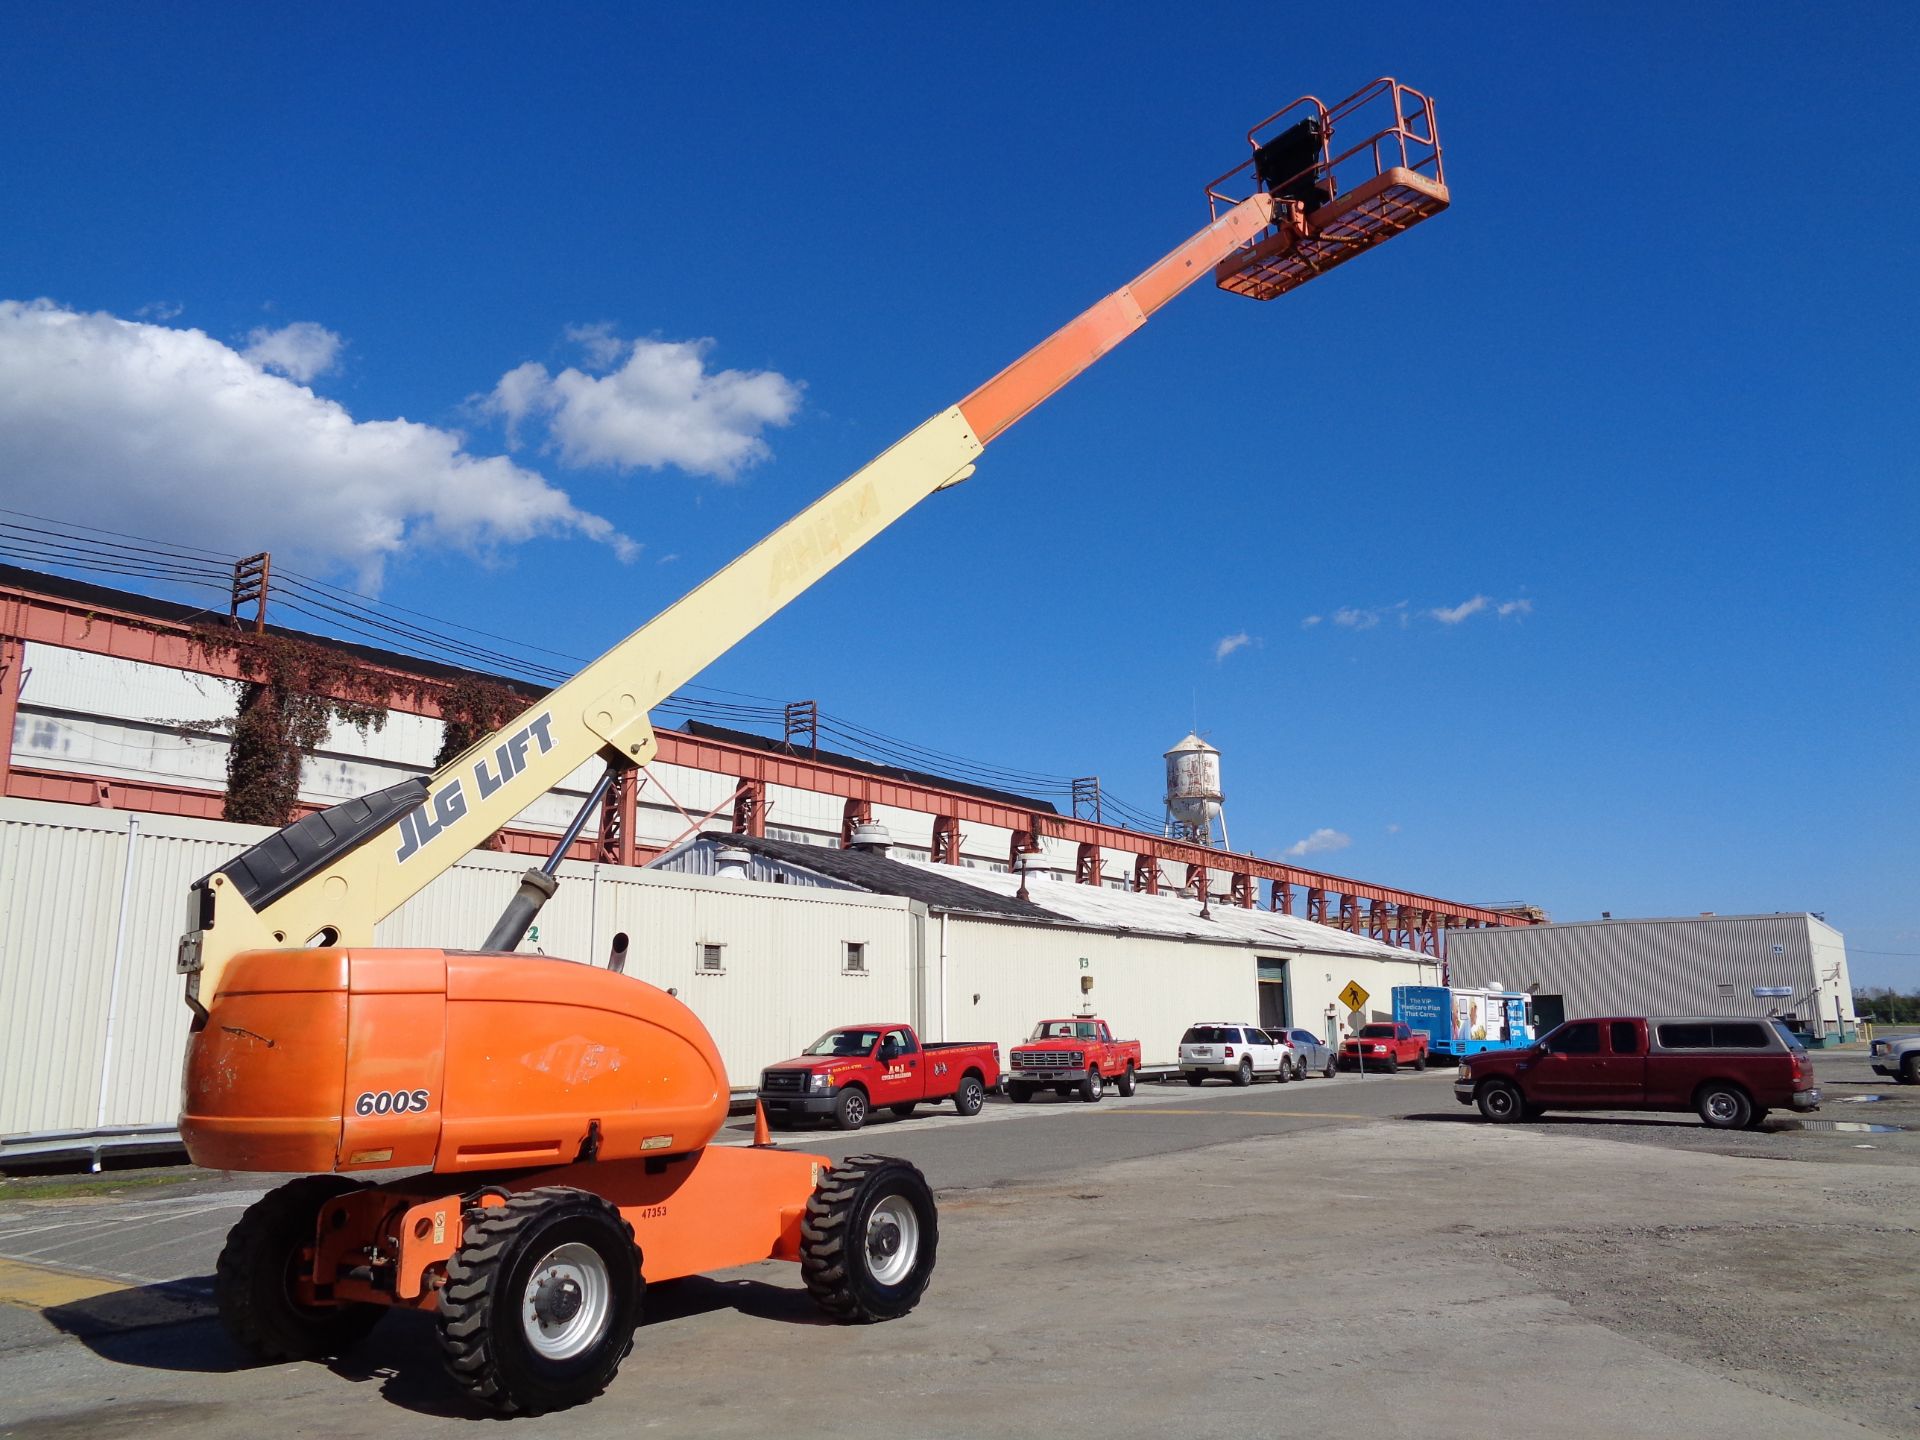 JLG 600S Boom Lift - 4x4 - 60ft Height - Image 8 of 19